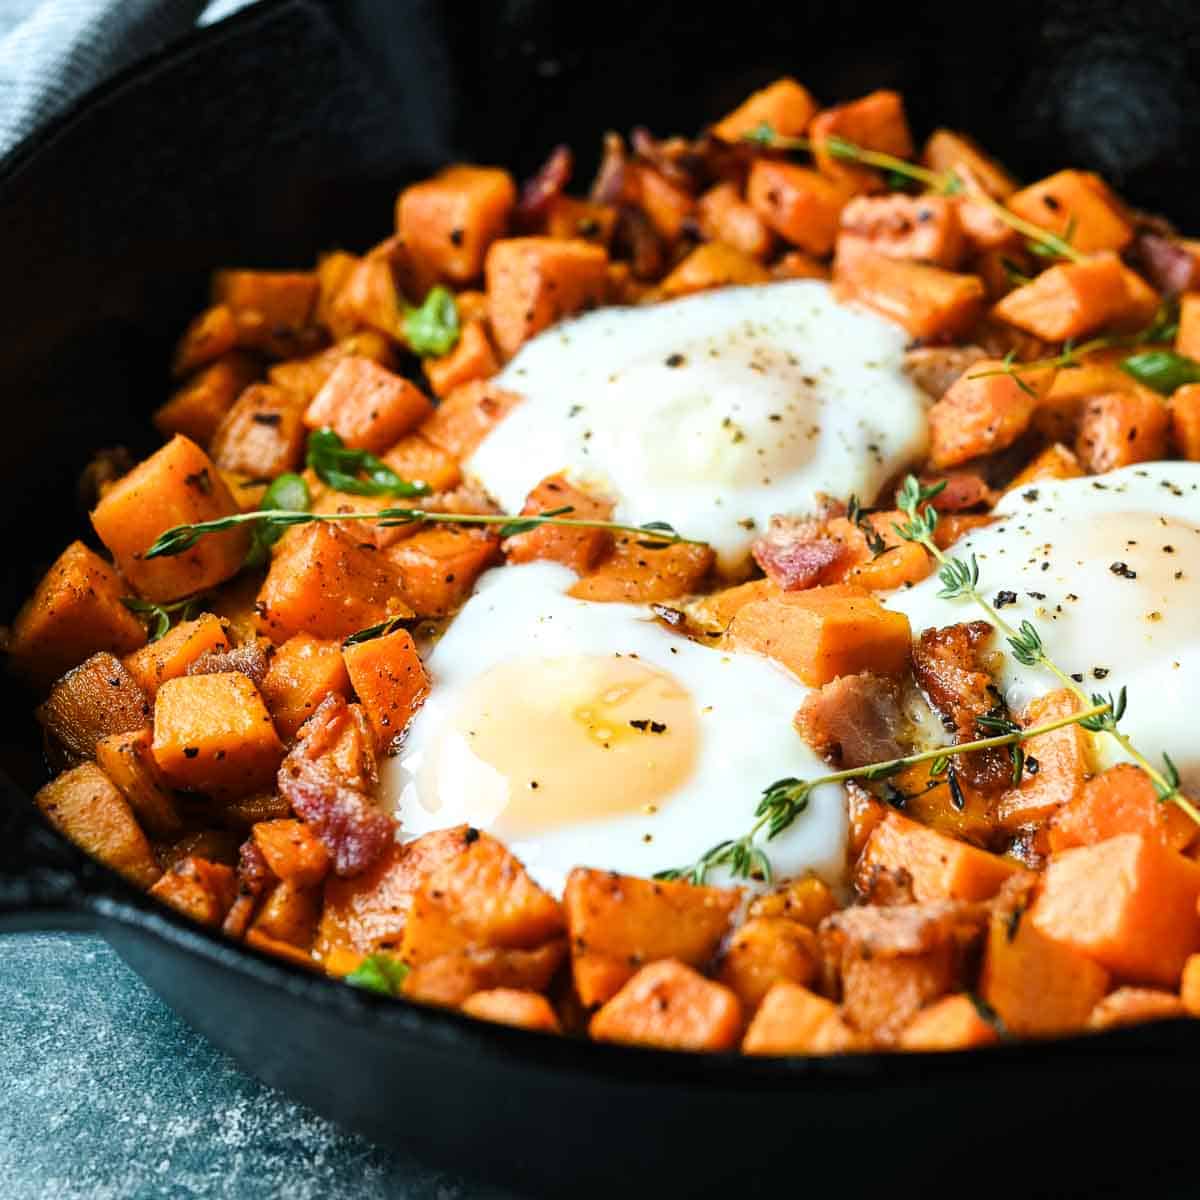 Sweet potatoes and bacon in a cast iron skillet with 3 fried eggs.